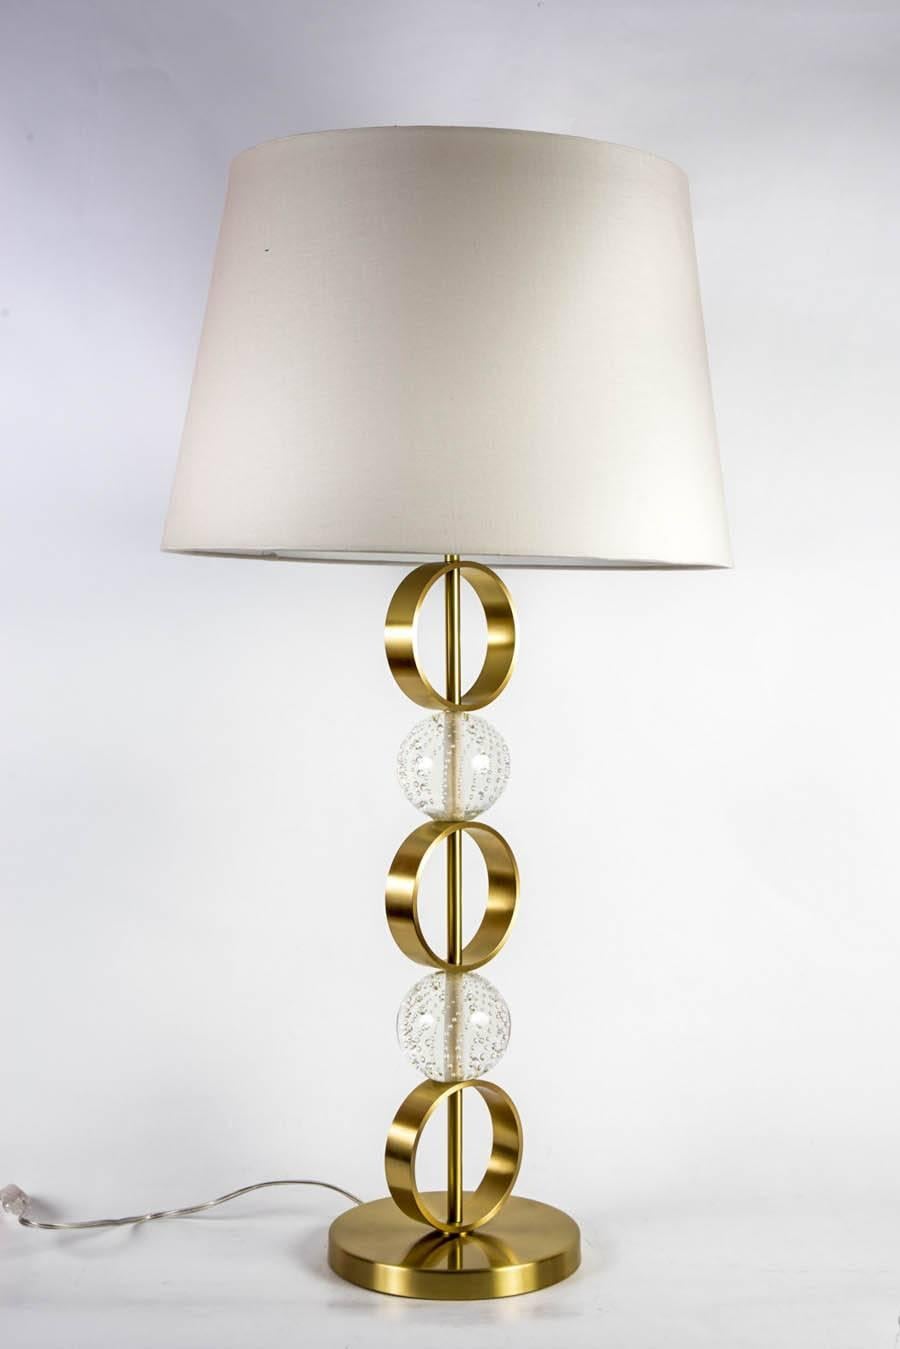 Pair of Table Lamps by Gianluca Fontana In Excellent Condition For Sale In Bois-Colombes, FR